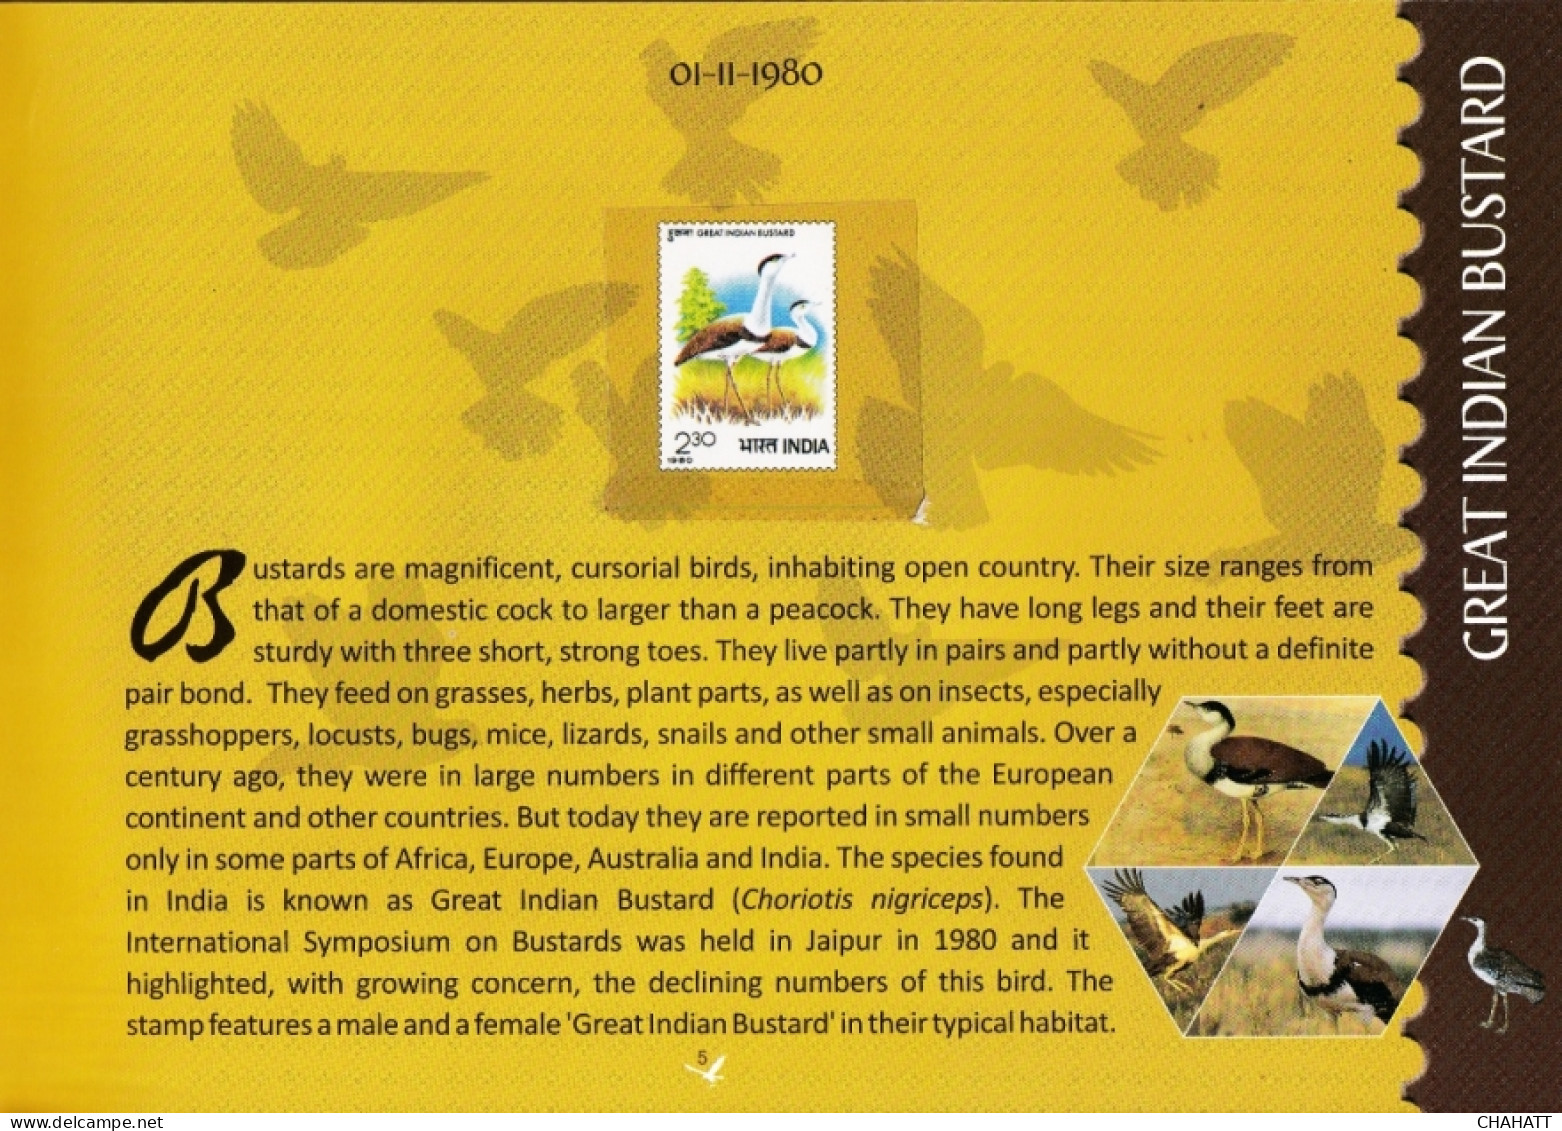 BIRDS OF INDIA- STAMP ALBUM- BEAUTIFULLY CURATED STAMP ALBUM WITH SPACE FOR STAMPS- ILLUSTRATED-BX4-36 - Wildlife